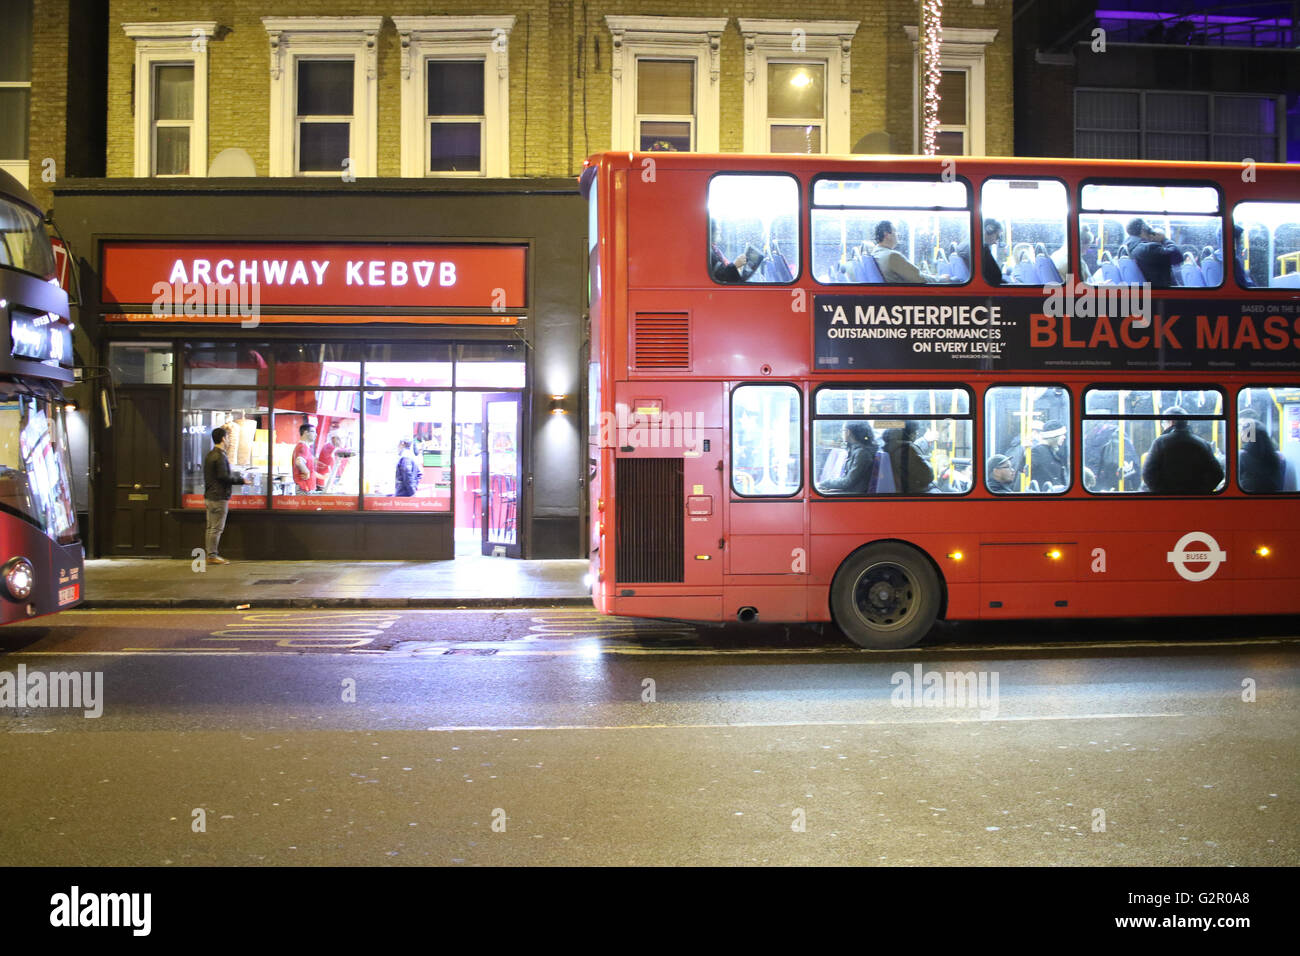 Buses at a stop on the Archway road outside a Kebab shop Stock Photo